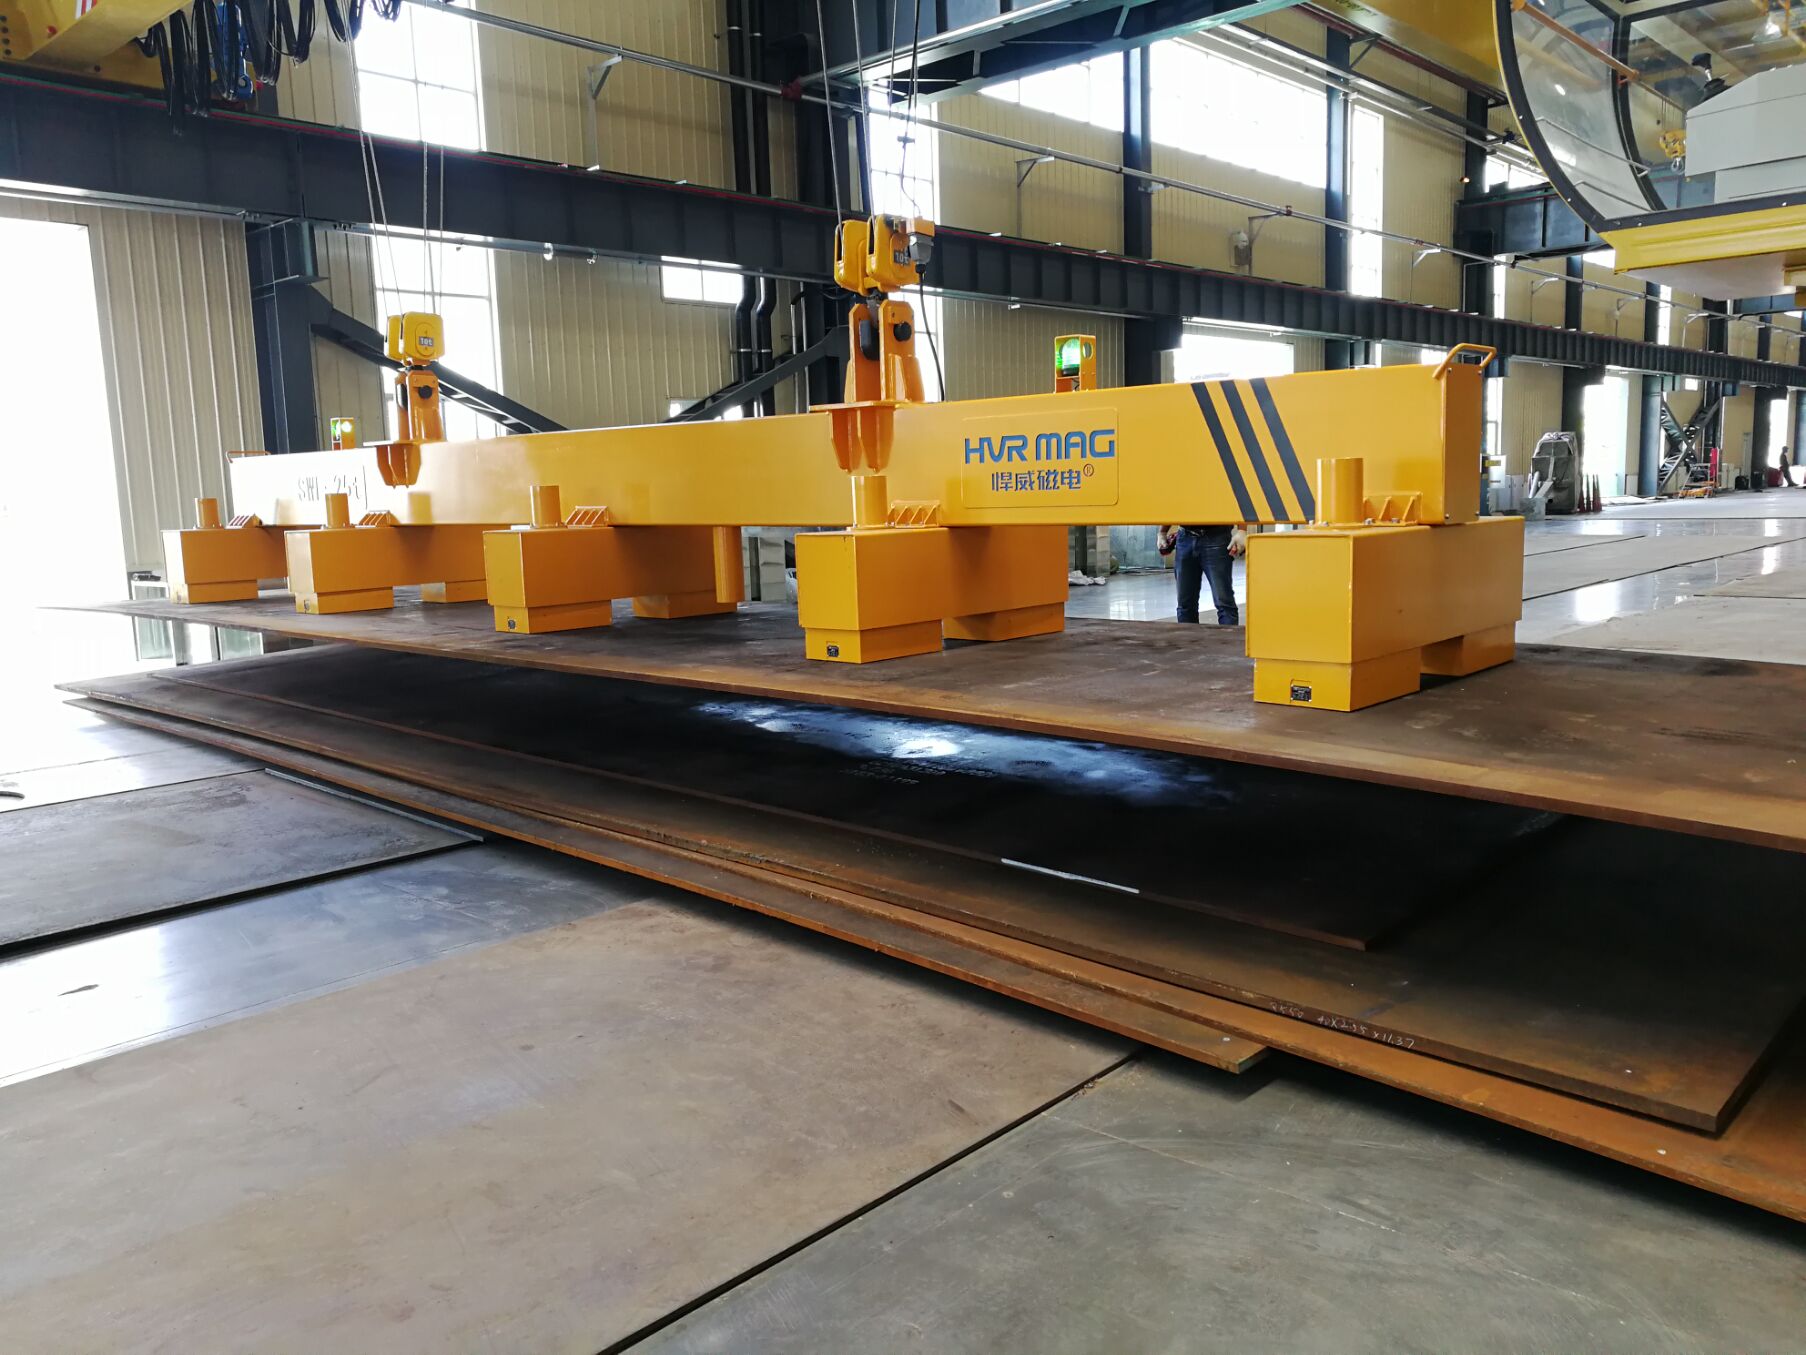 Lifting Magnet for Sale - Choose One for Your Steel Lifting Job